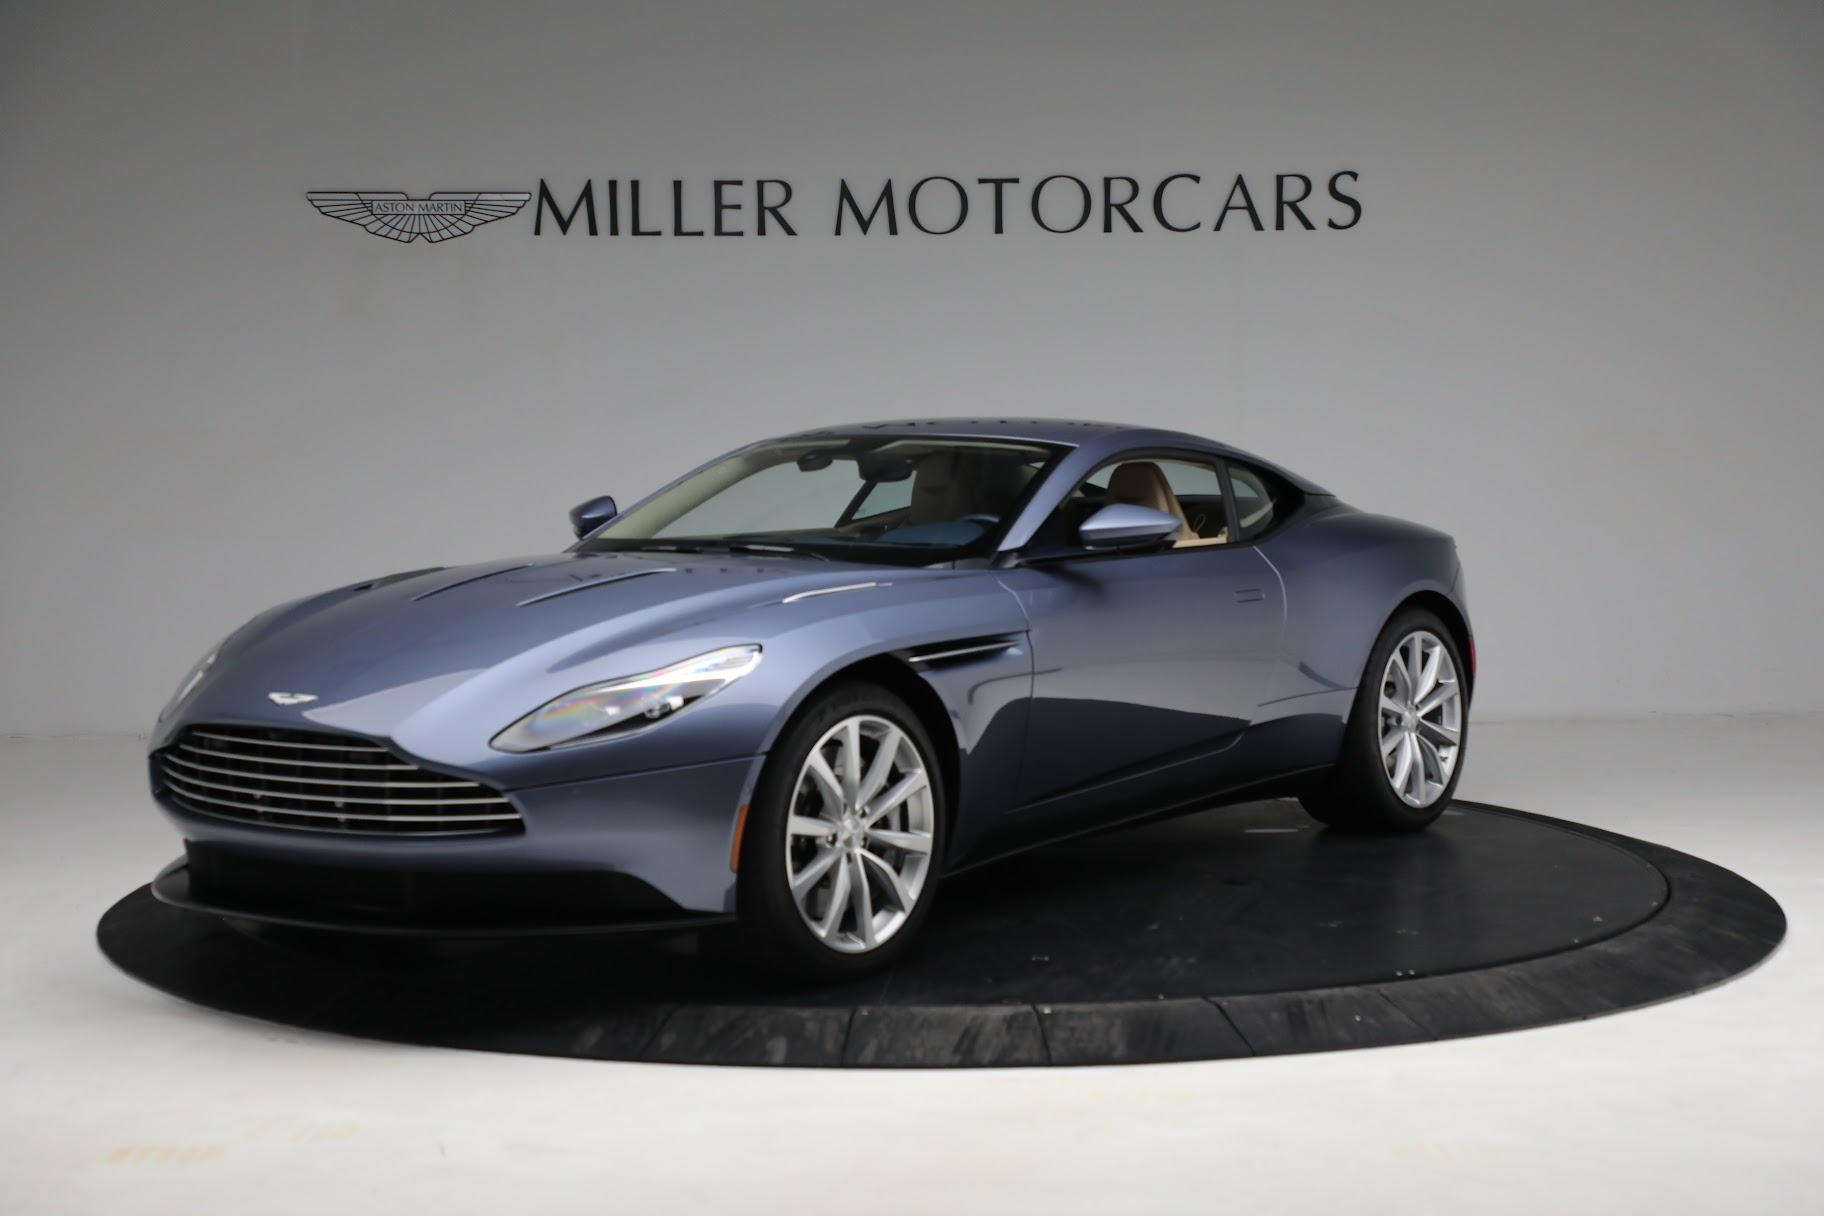 Used 2018 Aston Martin DB11 V12 for sale Sold at Aston Martin of Greenwich in Greenwich CT 06830 1